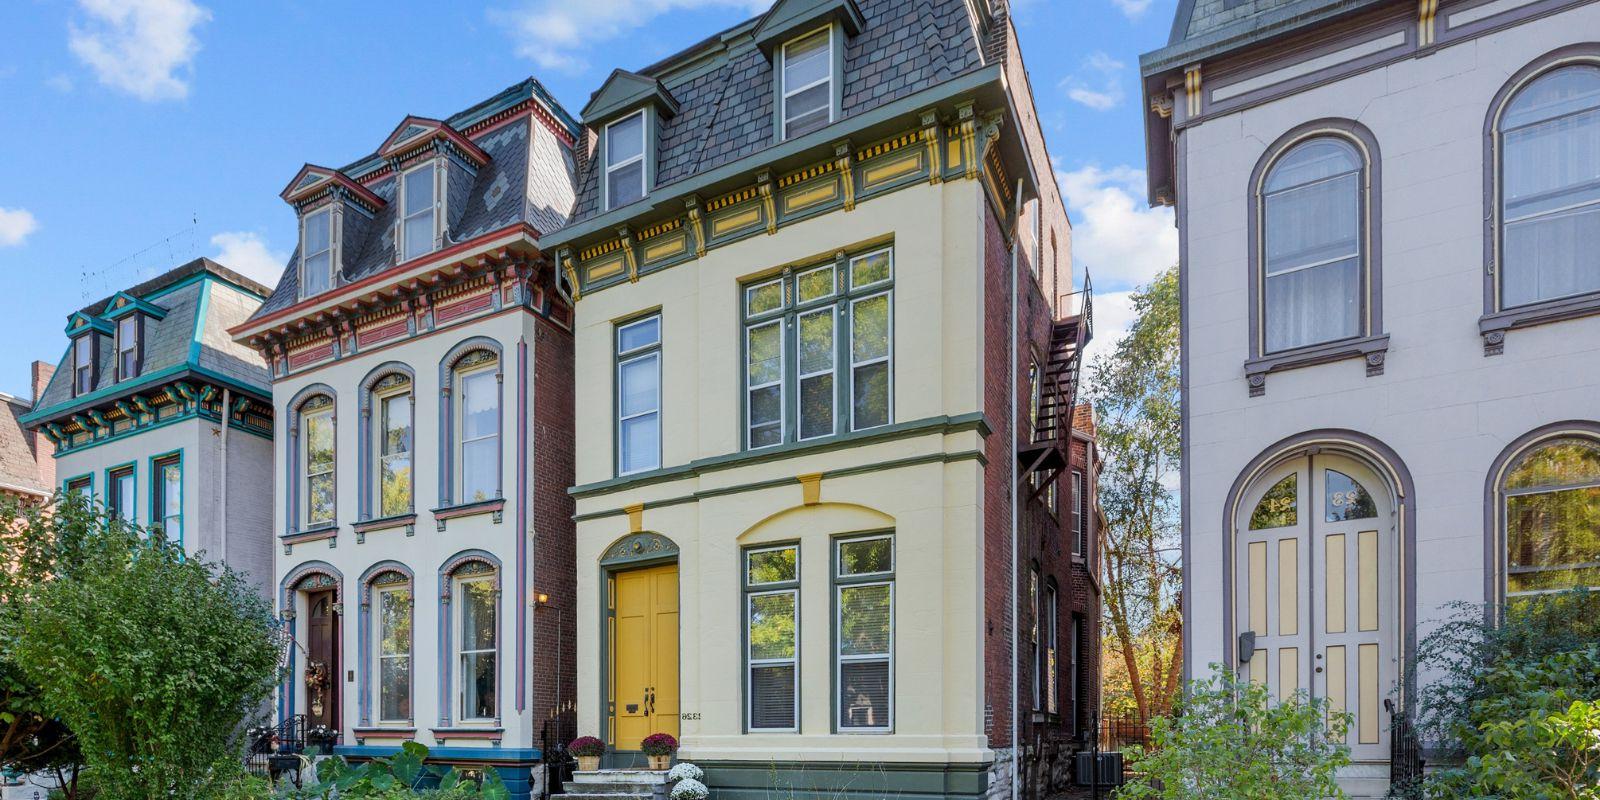 In Lafayette Square, you can marvel at meticulously restored 150-year-old Victorian mansions.